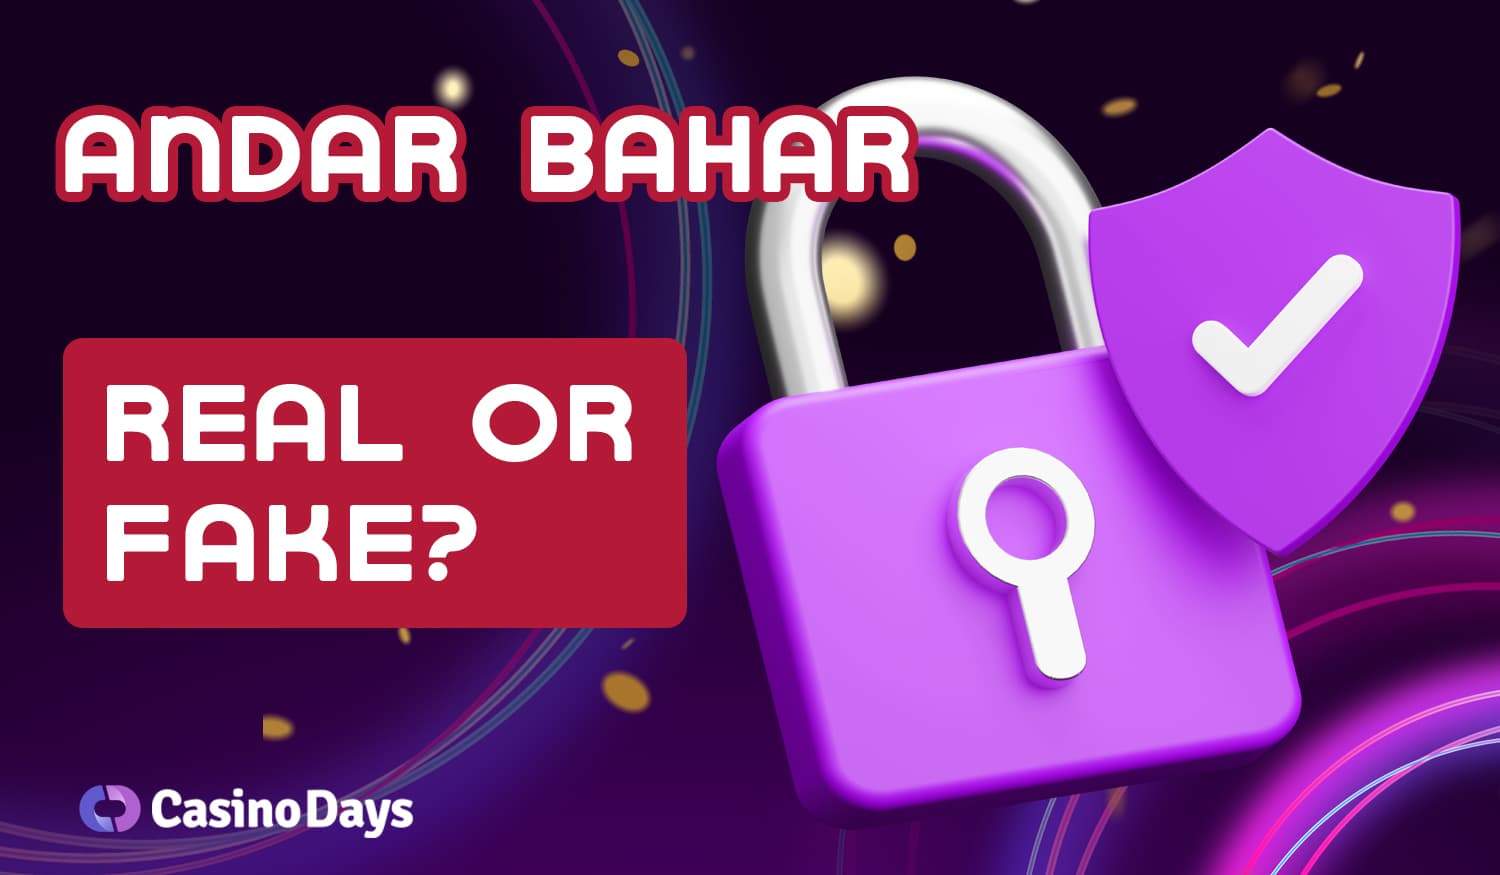 Is it legal for Indian users to start playing Andar Bahar at Casino Days site